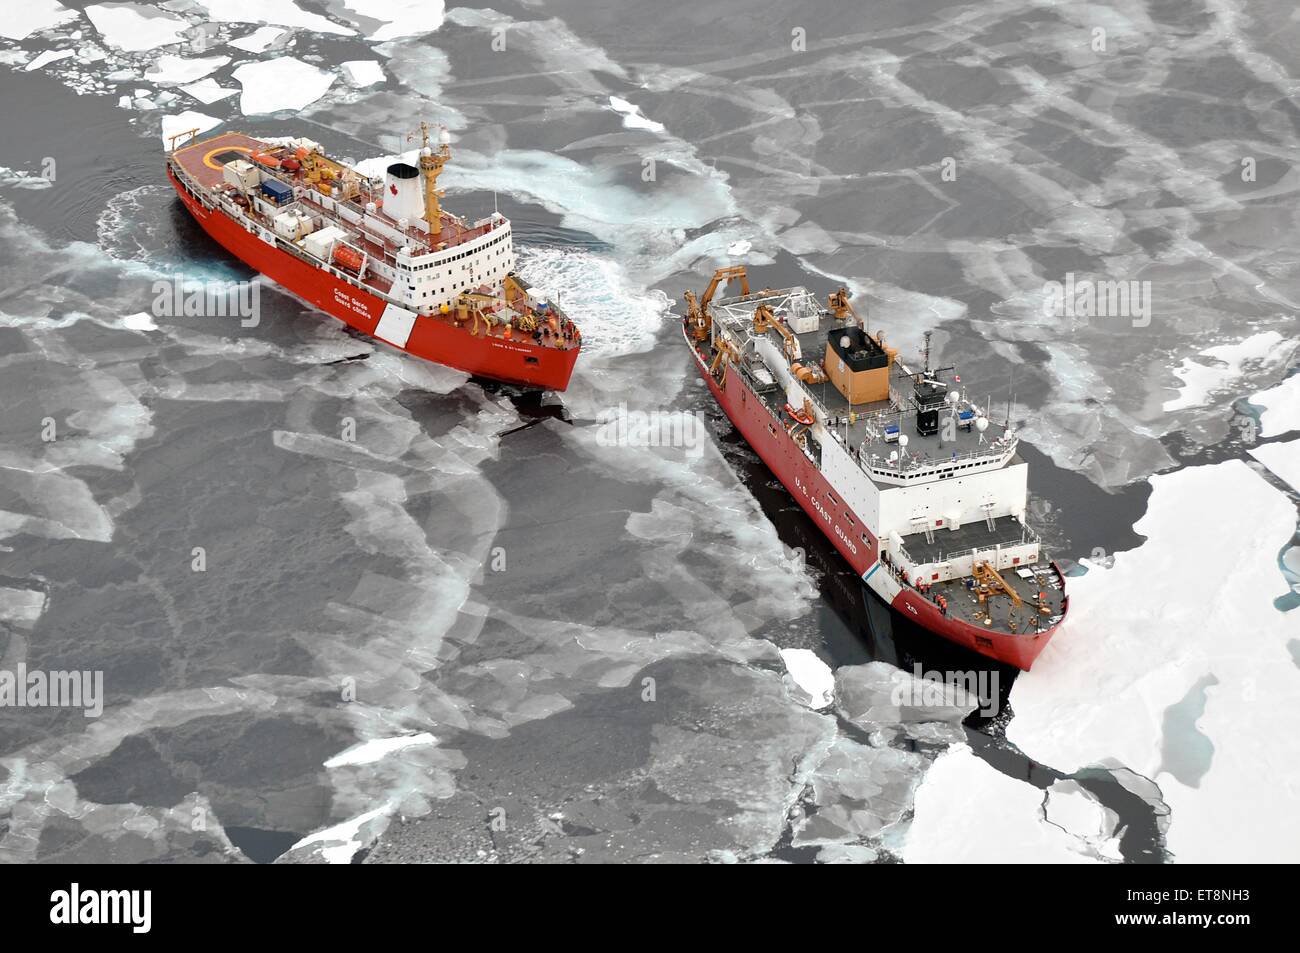 US Coast Guard Cutter Healy breaks ice alongside the Canadian Coast Guard heavy icebreaker CCGS Louis S. St-Laurent September 5, 2009 in the Arctic. Stock Photo